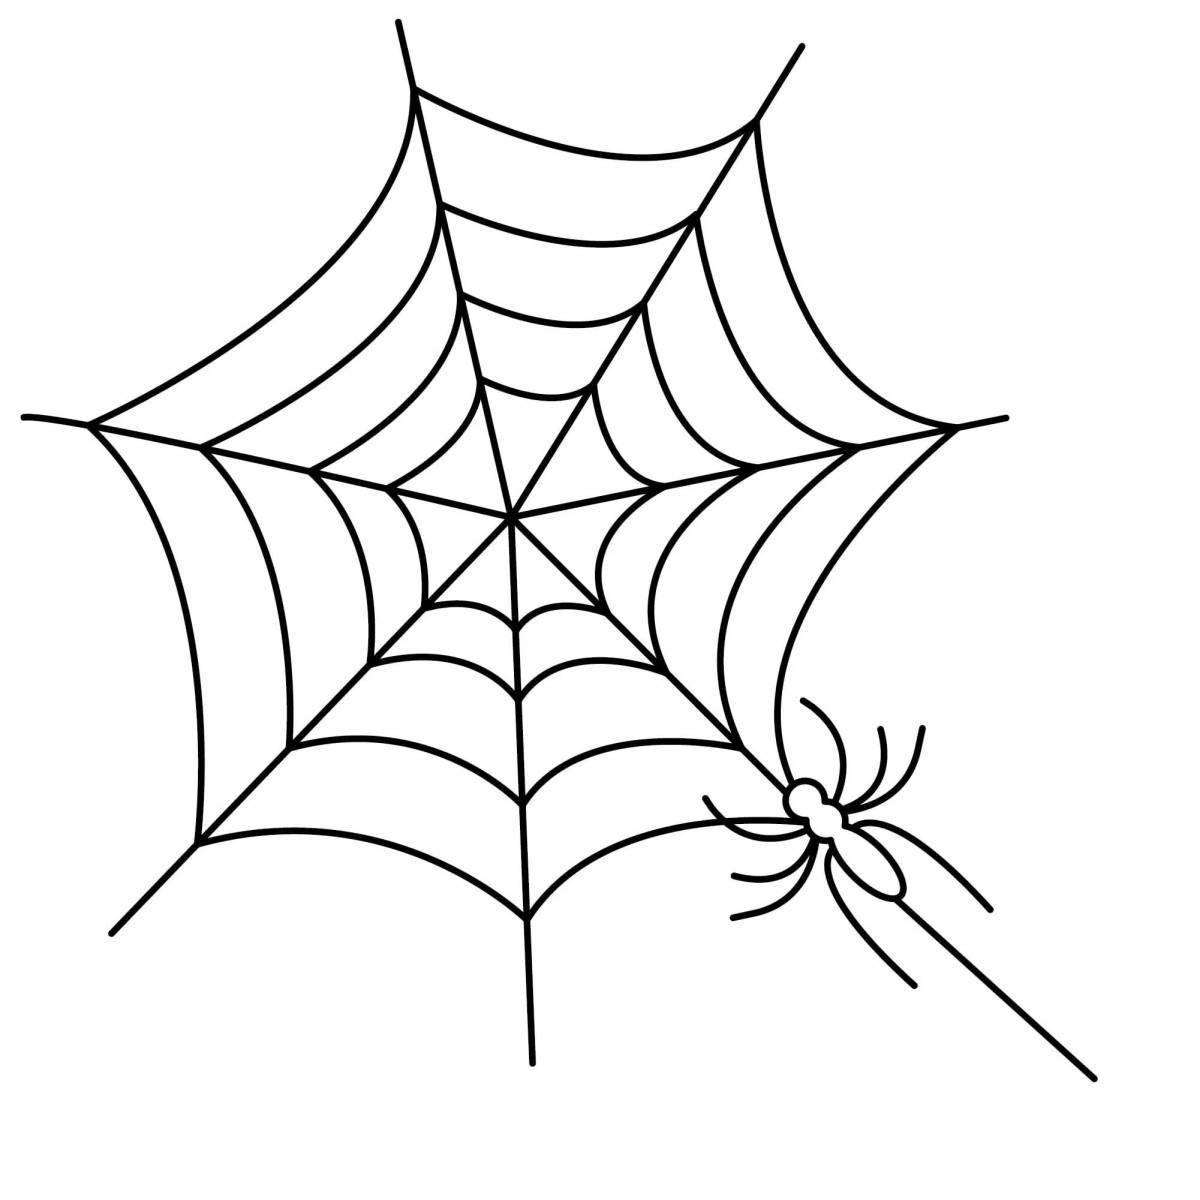 Detailed coloring web for children